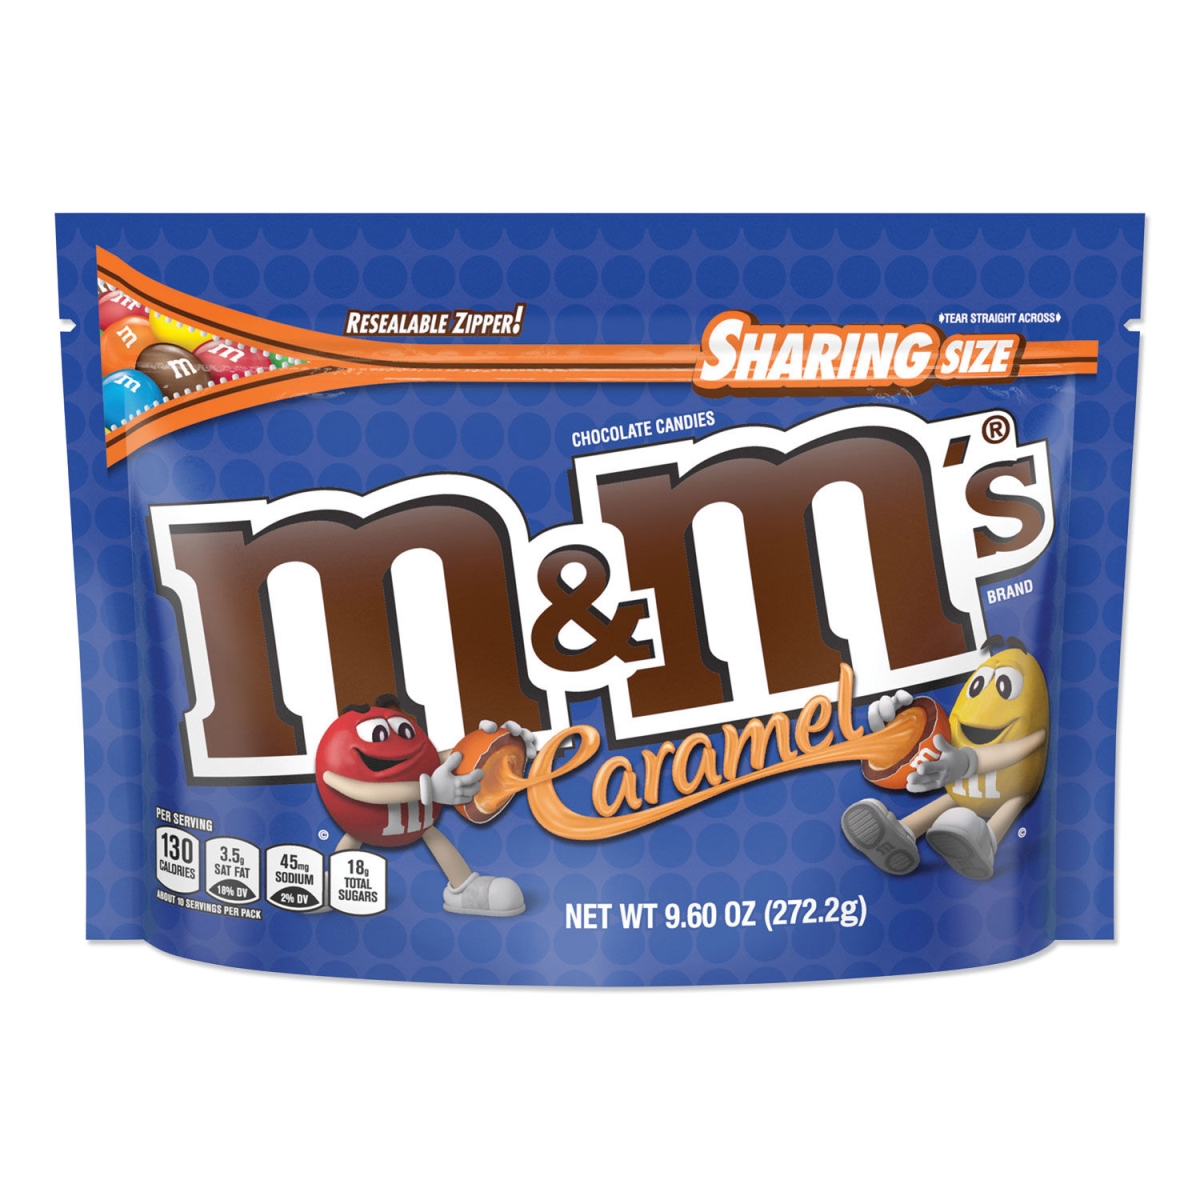 Picture of Mars MMM50887 9.6 oz Chocolate Candies Caramel